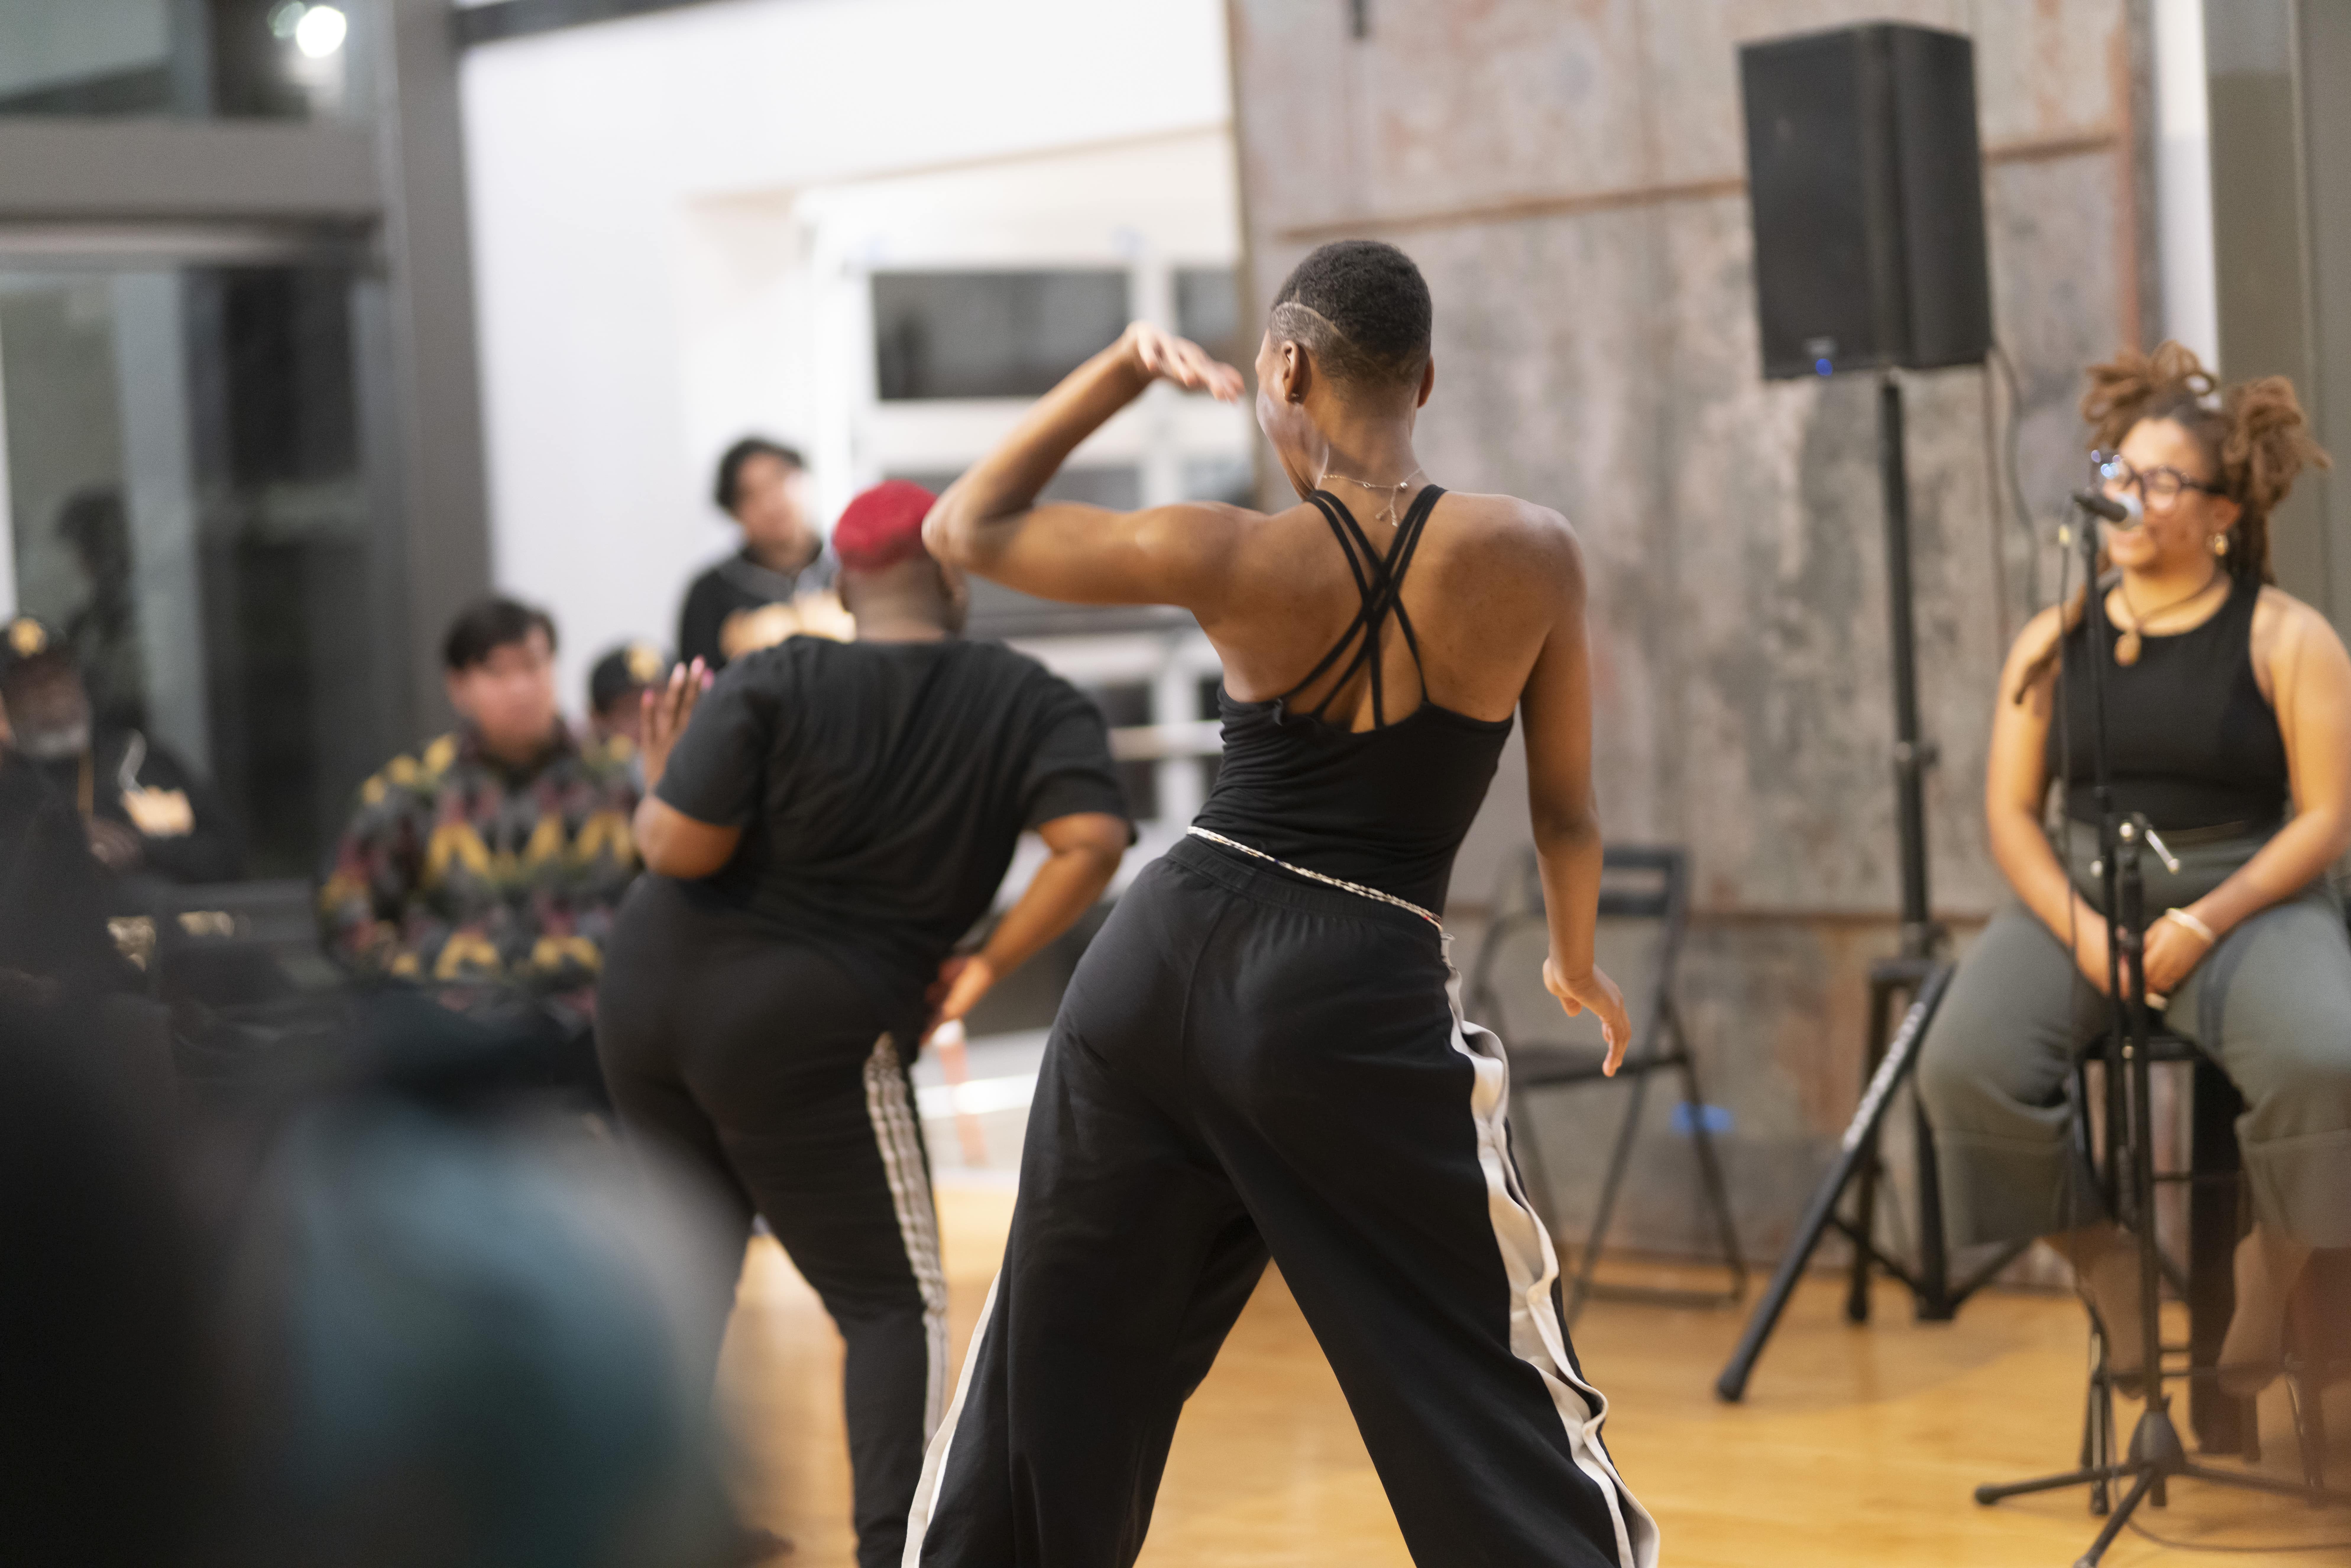  Deja Hood (at the foreground) & Keyierra Collins (in the background) perform at rehearse, play, jubilate at Dorchester Art + Housing Collaborative. Aaliyah Christina sits on a stool and speaks into a mic (blurred in the background). 